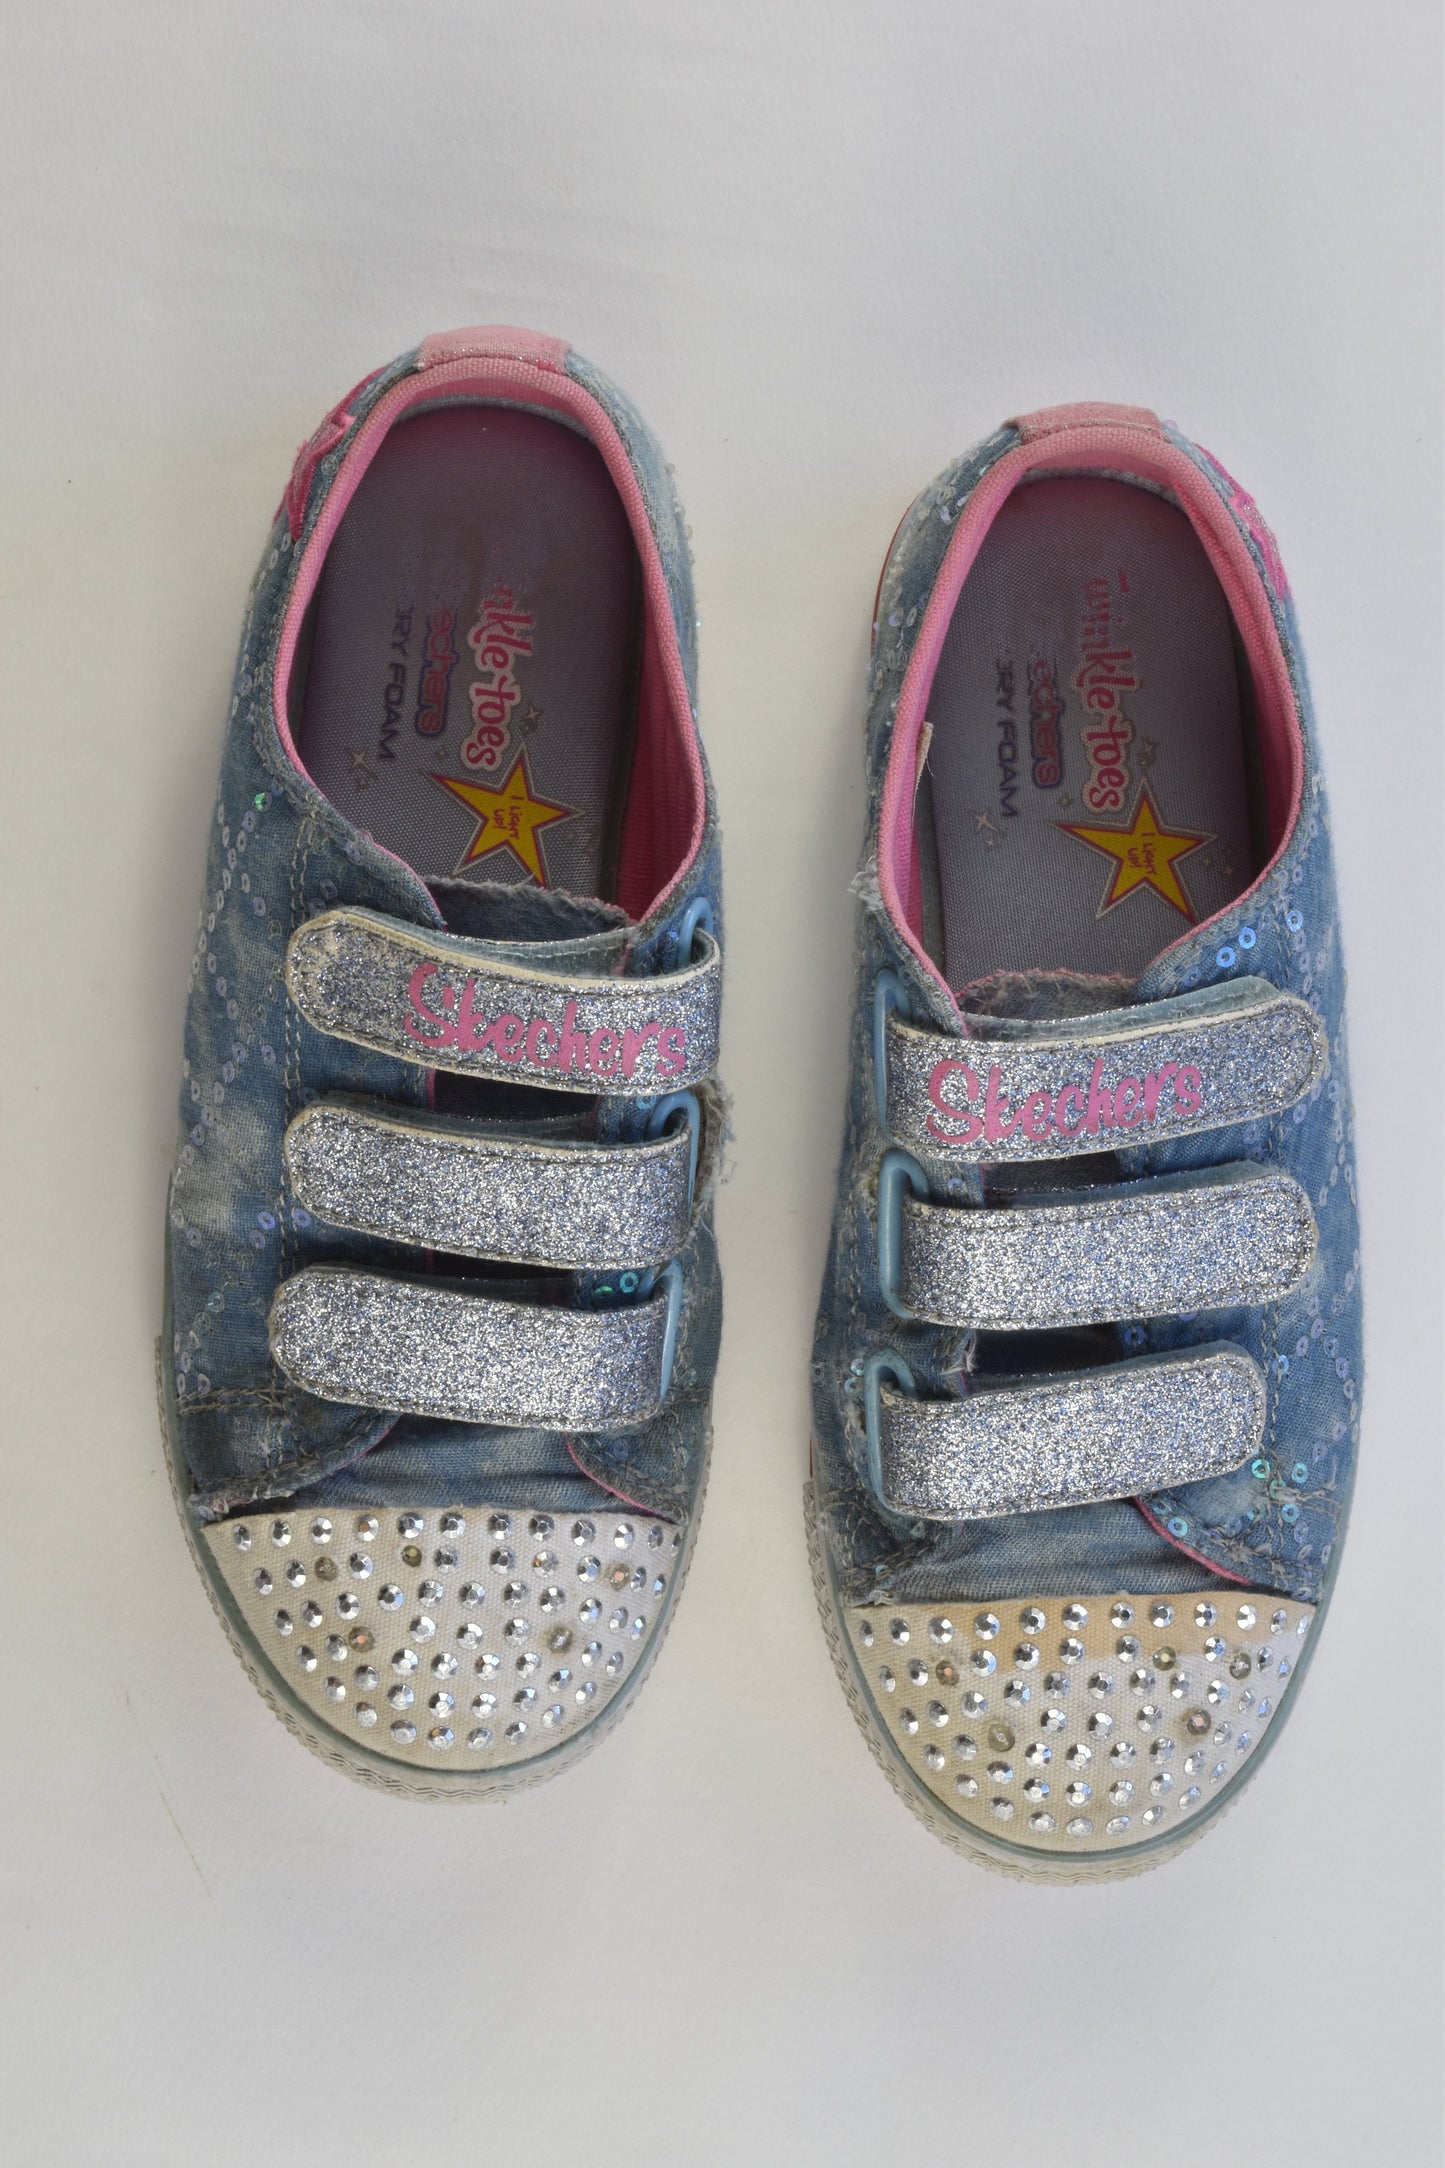 Skechers Twinkle Toes Size 13 Light-Up Shoes